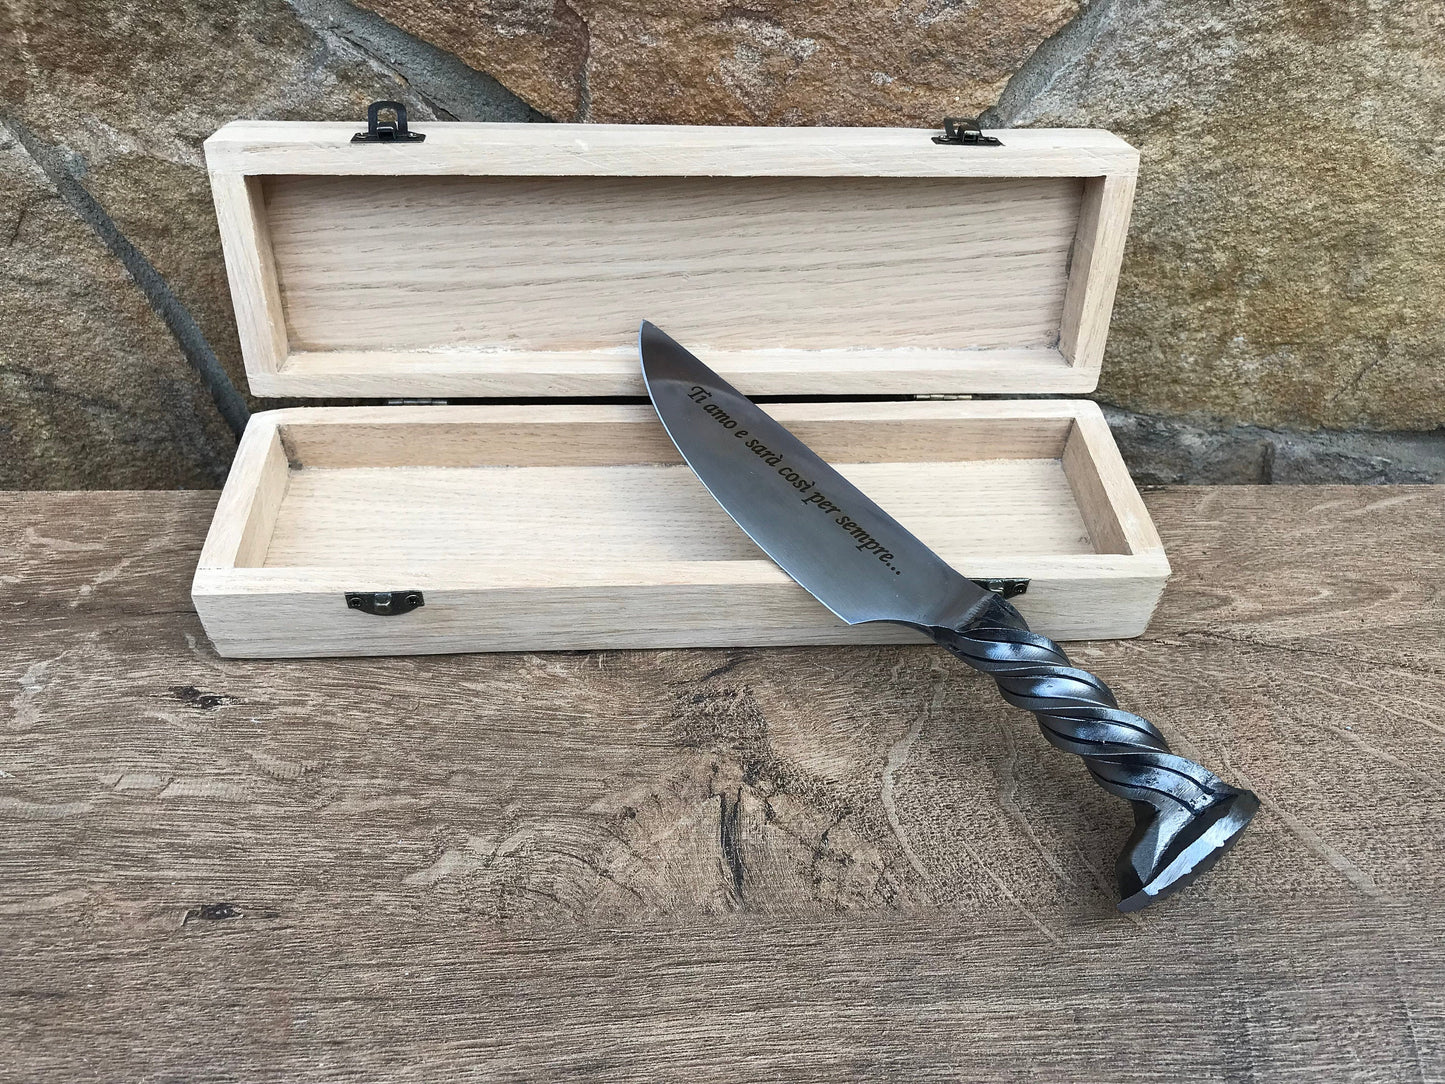 Iron gift, gift for him, mens gifts, engraved knife, railroad spike knife, iron anniversary, knife for groomsman, knife gift, knife gift box